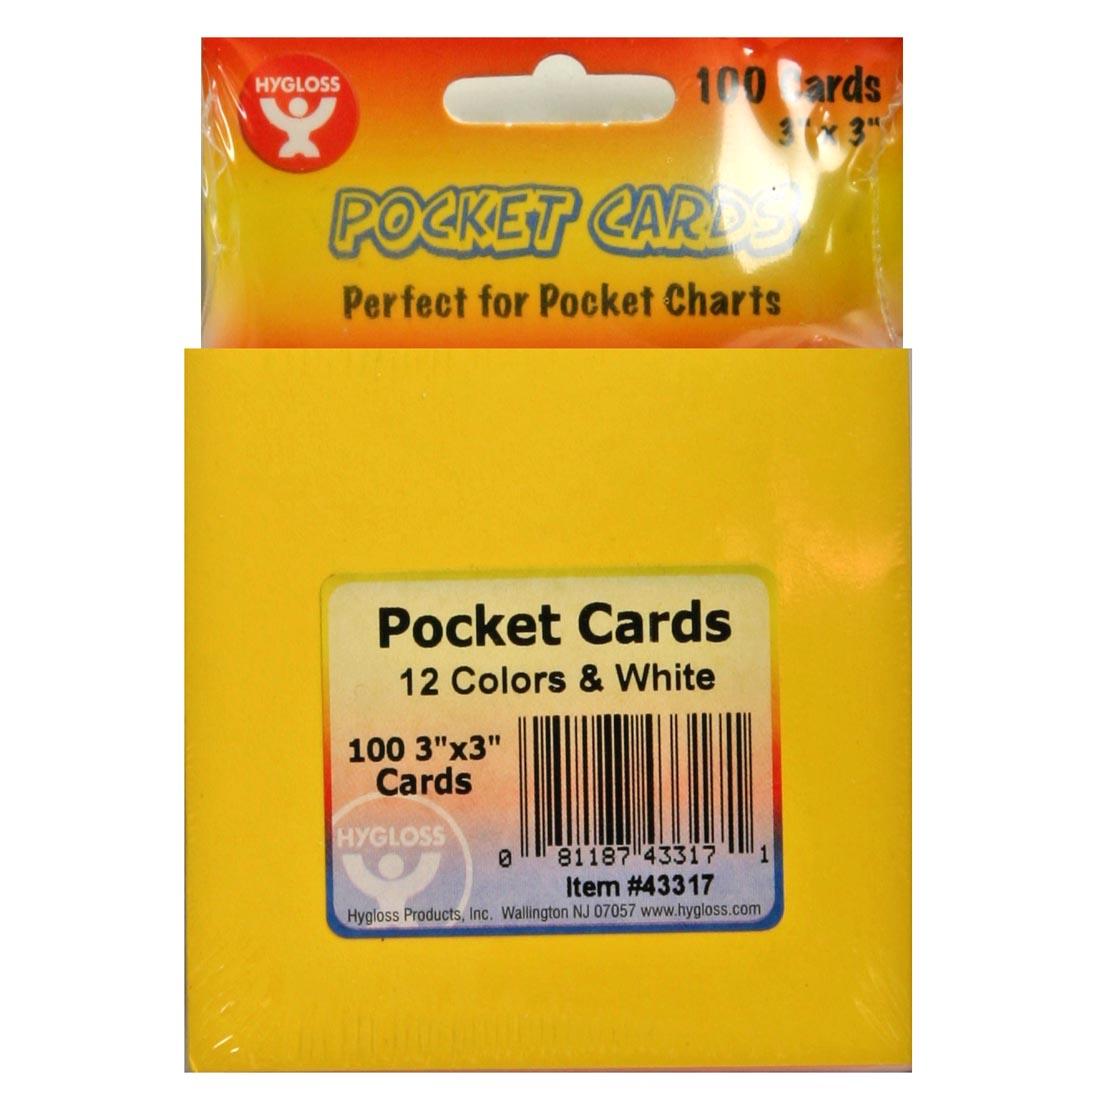 Package of Pocket Cards for Pocket Charts by Hygloss